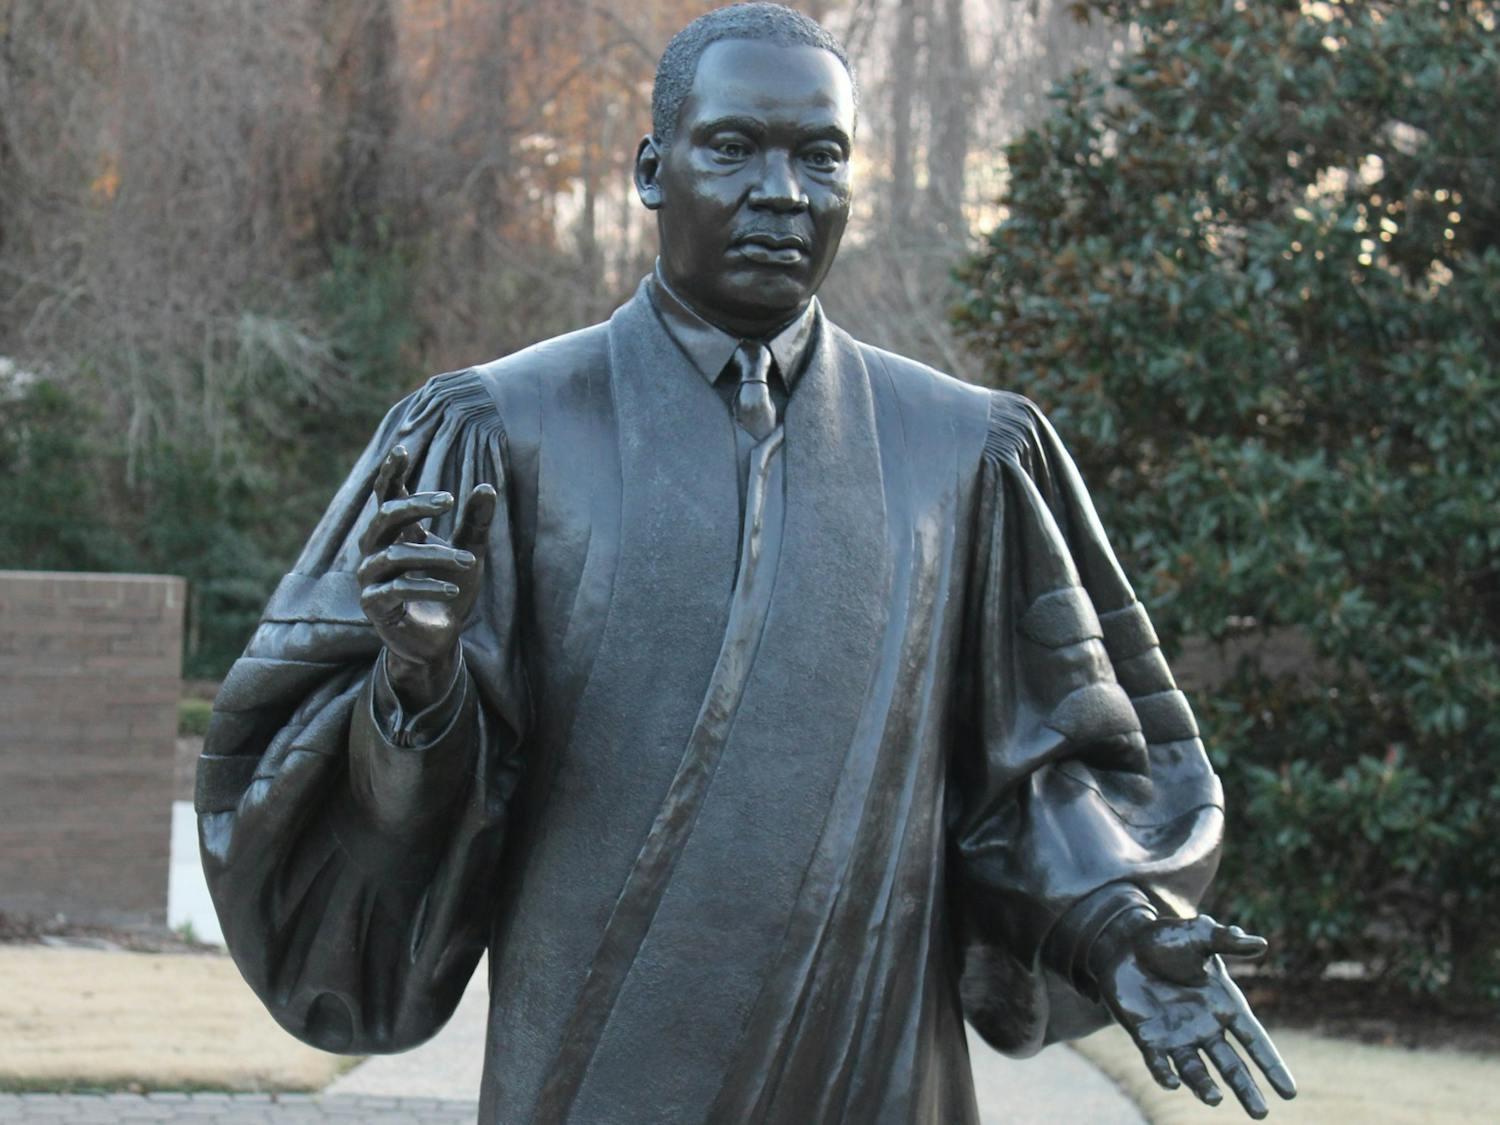 The Dr. Marin Luther King Jr. memorial statue stands at the Dr. Martin Luther King Jr. Memorial Gardens in Raleigh, NC on Feb 6, 2022.